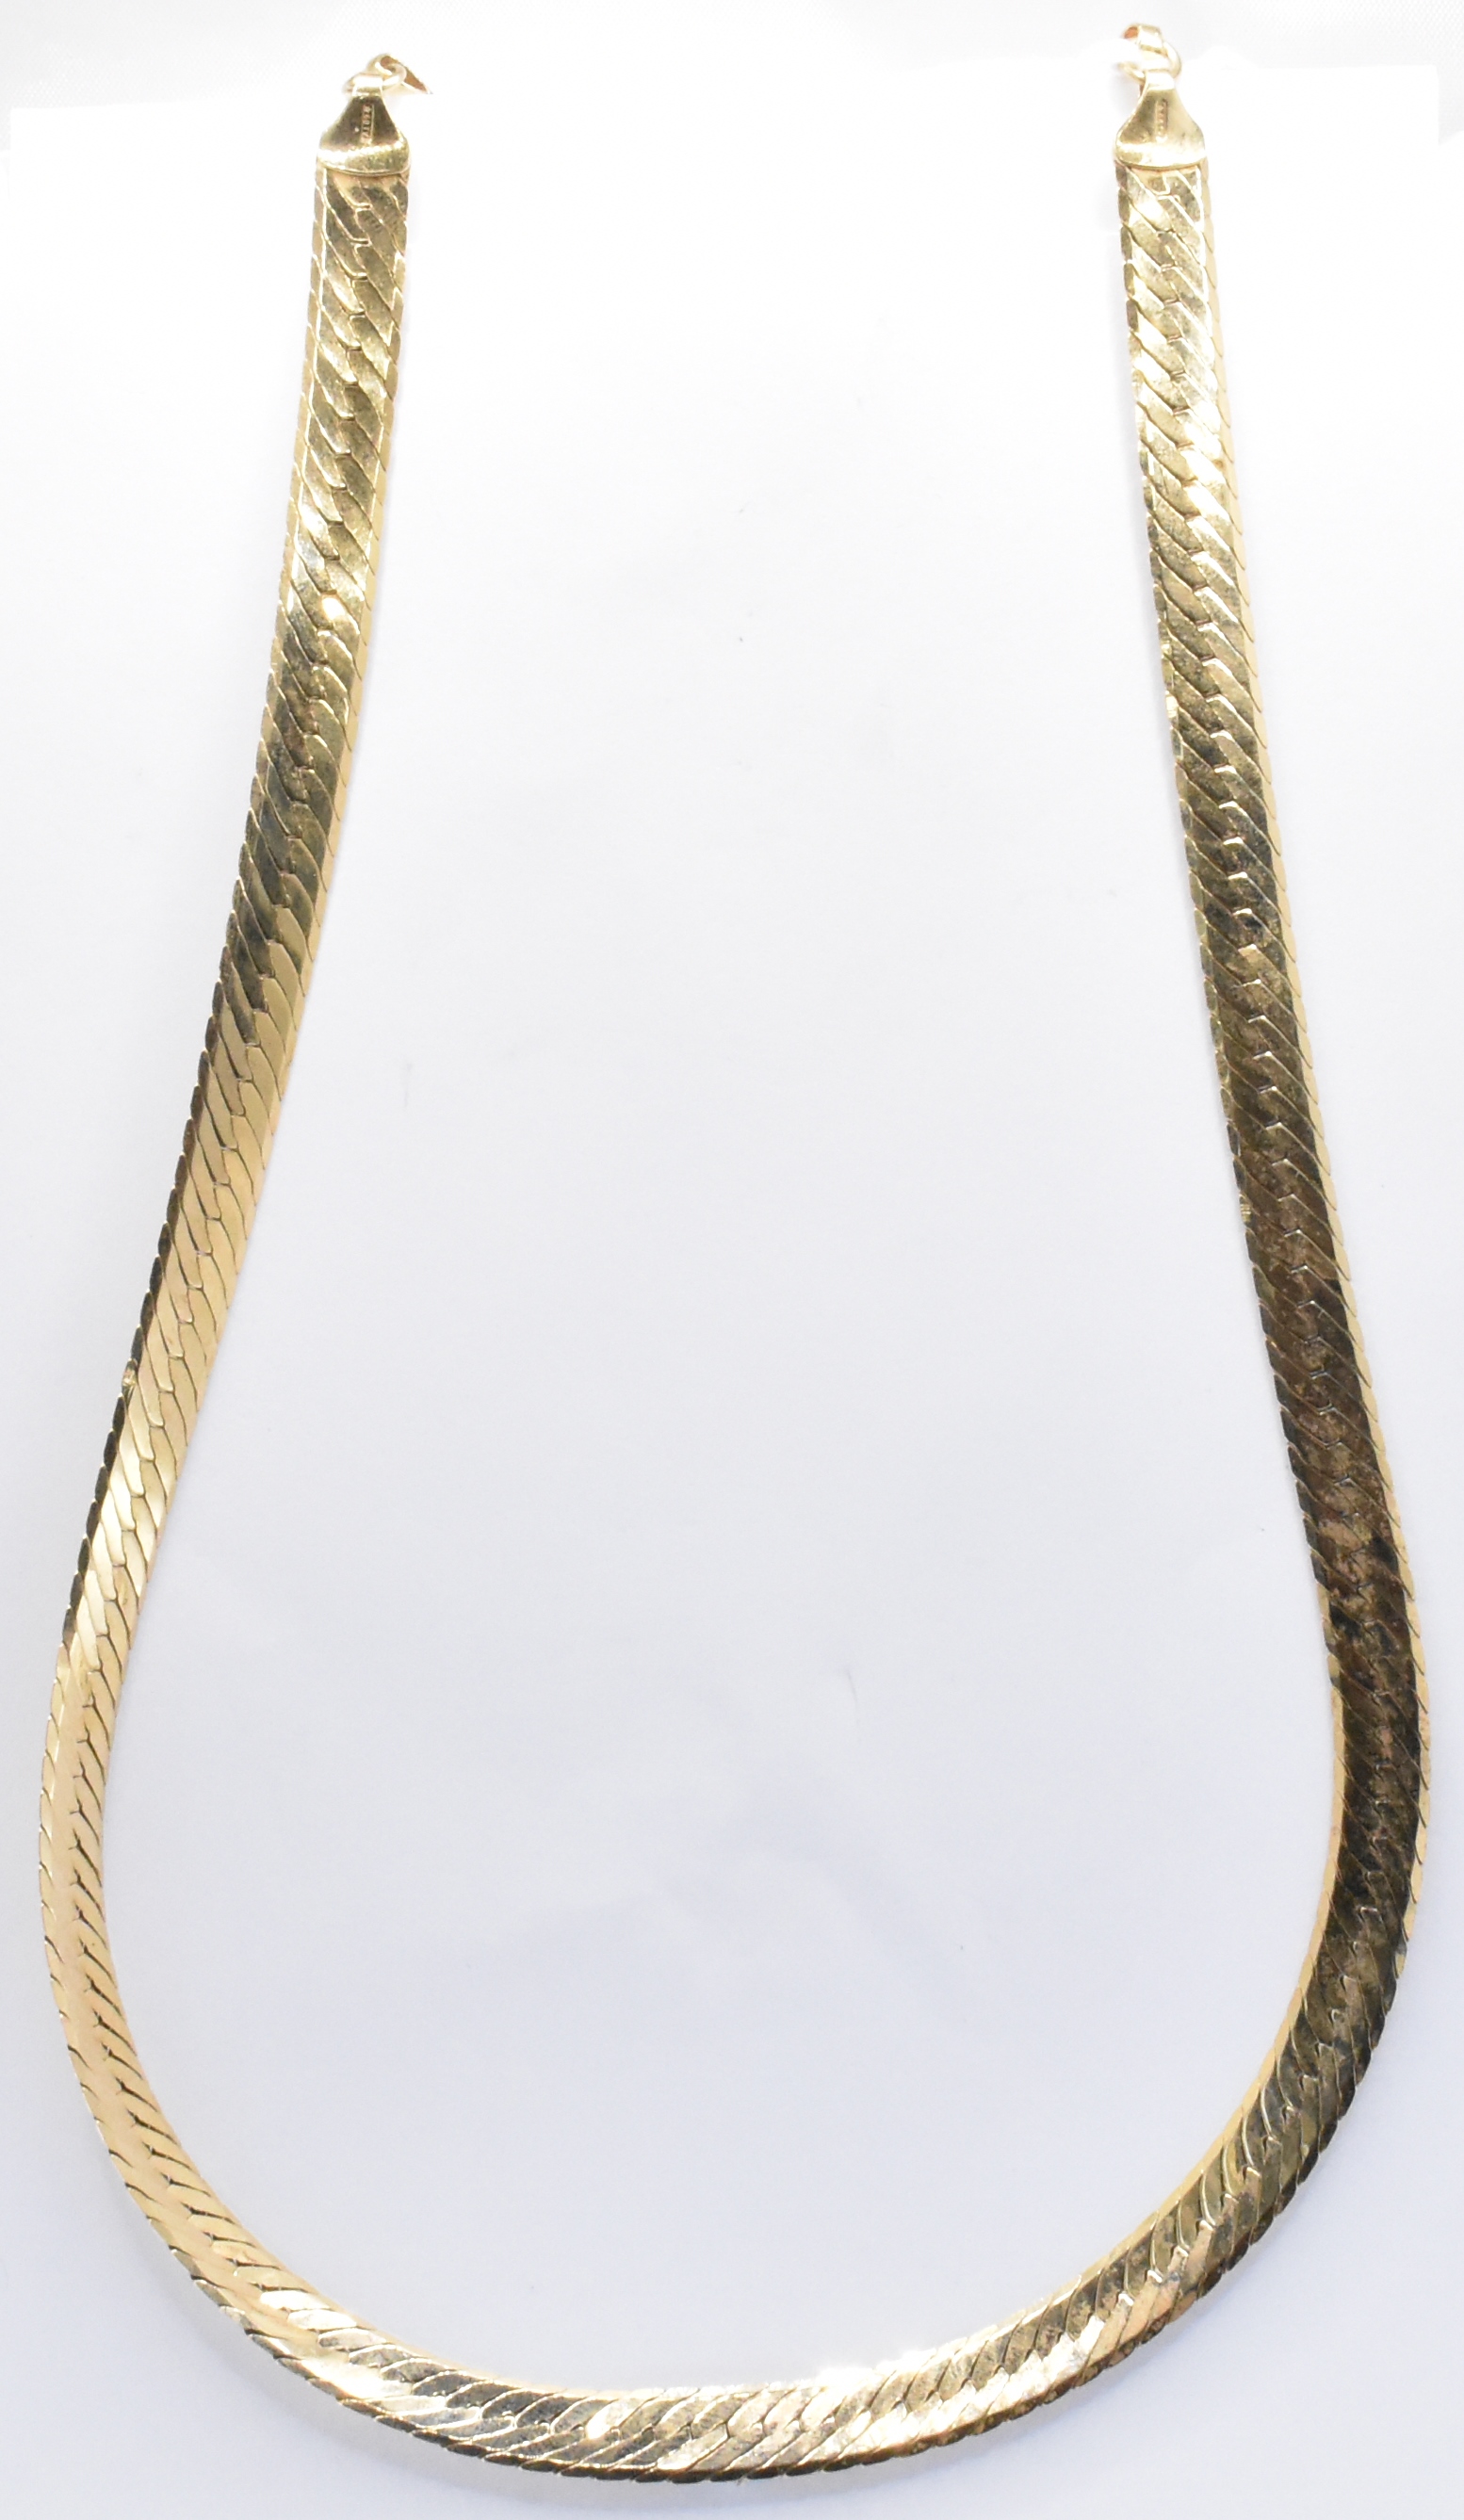 14CT GOLD FLAT SNAKE CHAIN NECKLACE - Image 6 of 11